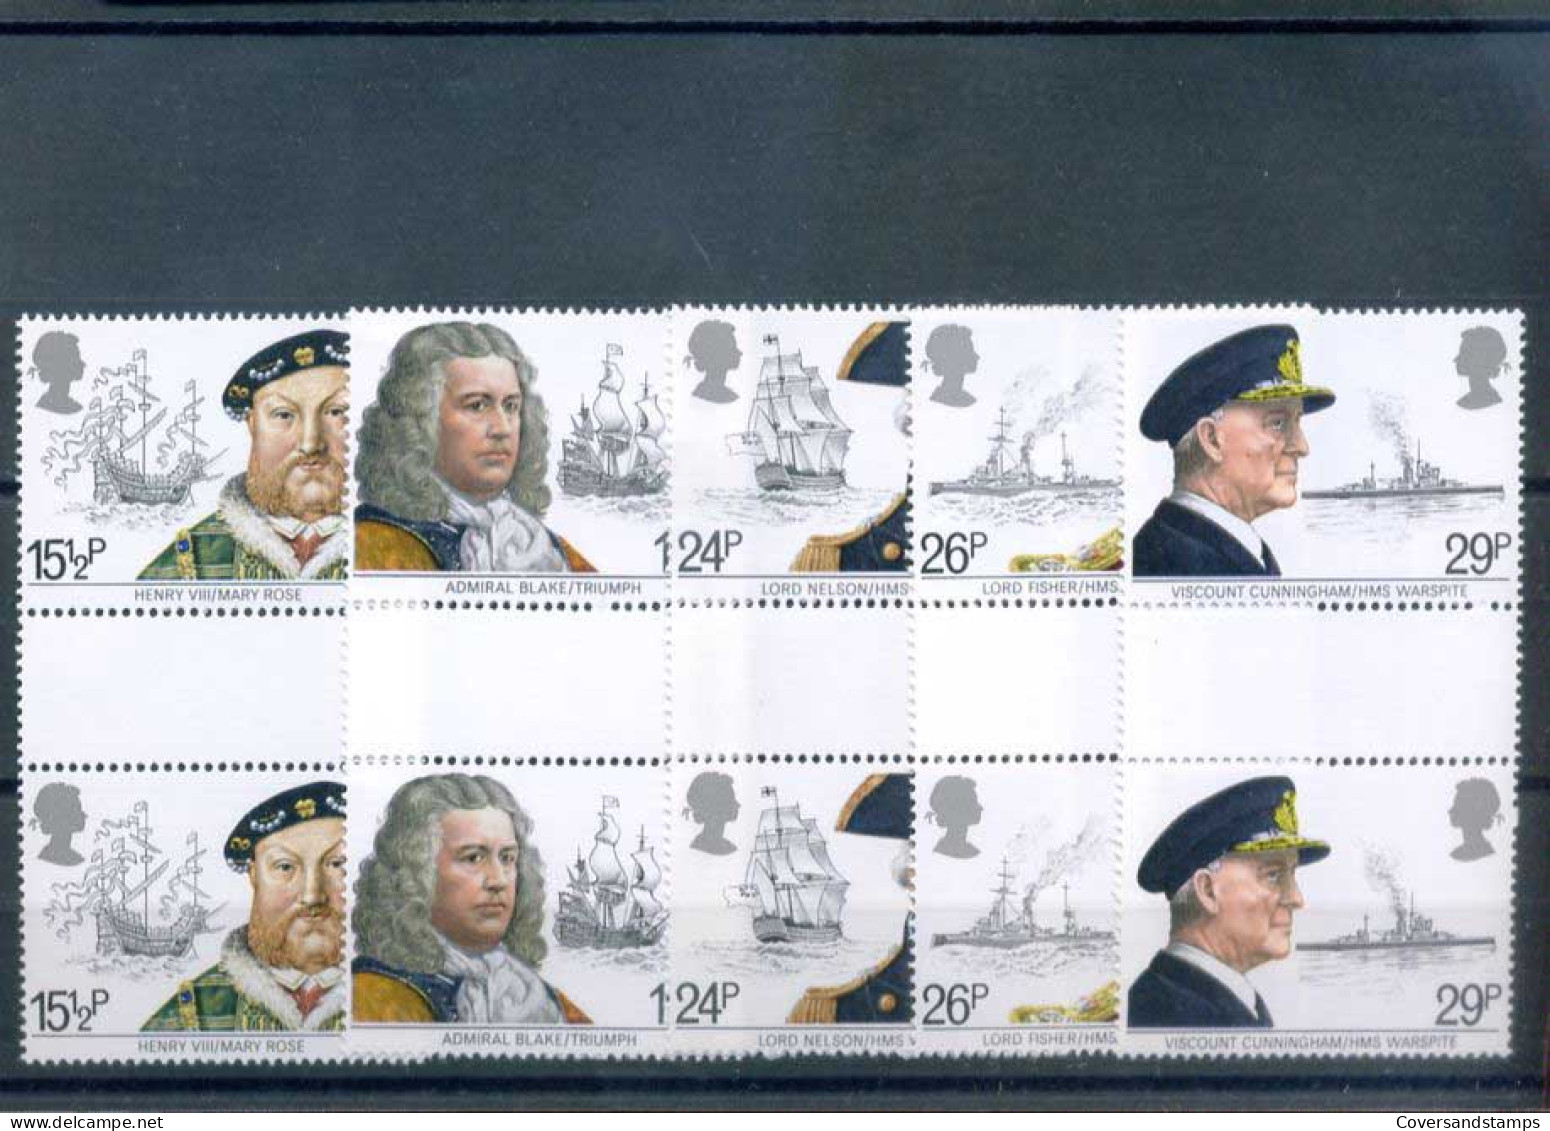 Groot-Brittannië  - Lord Nelson Etc. - Y 1047/51 - Sc 991/95    **  MNH                  - Nuevos